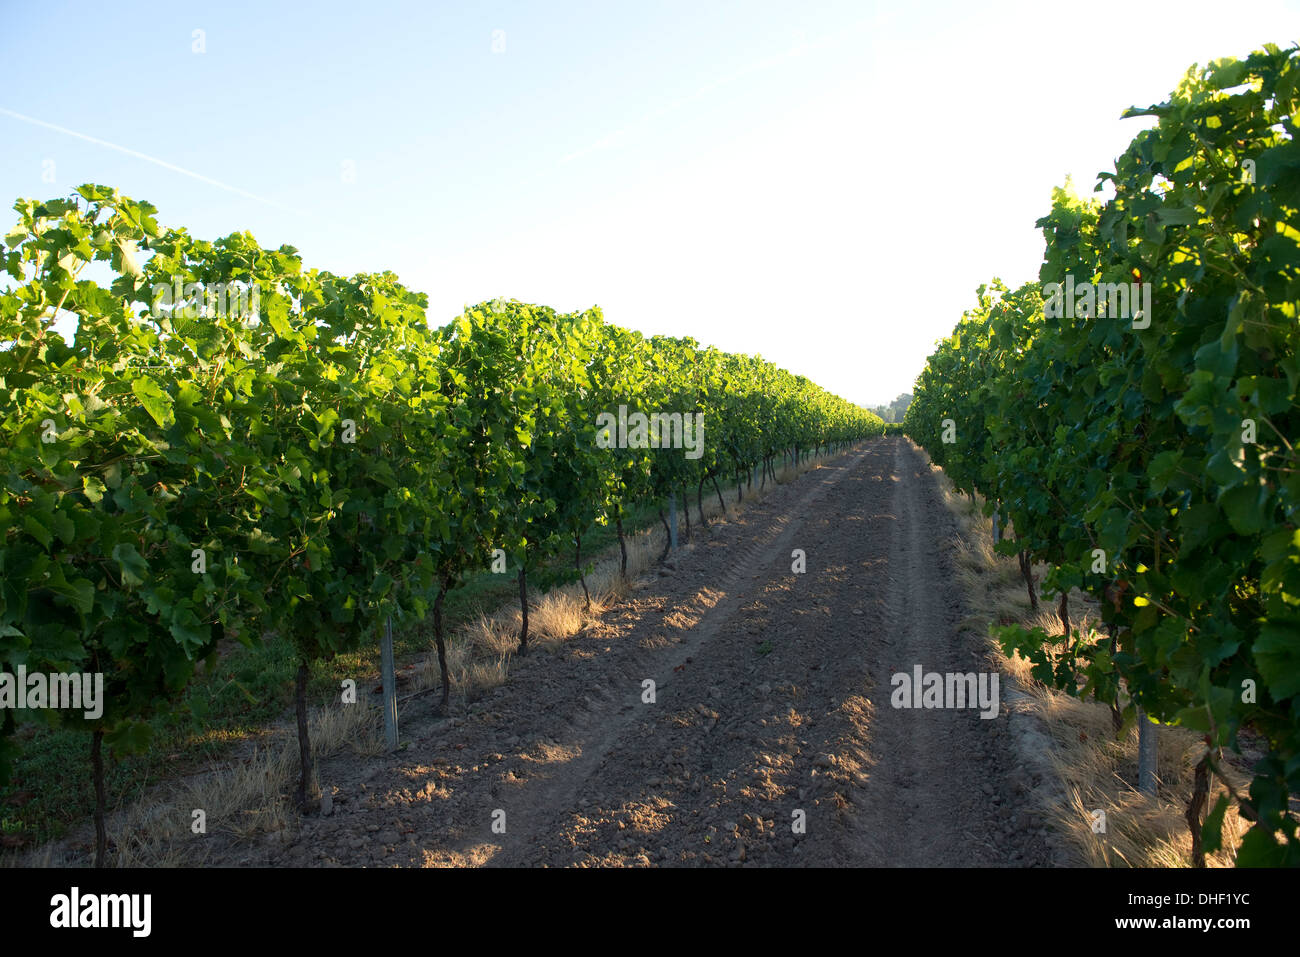 Grapevines in fruit lit by the early morning sun on the banks of the Dordogne near Sainte-Foy-La-Grande, Gironde, France, August Stock Photo